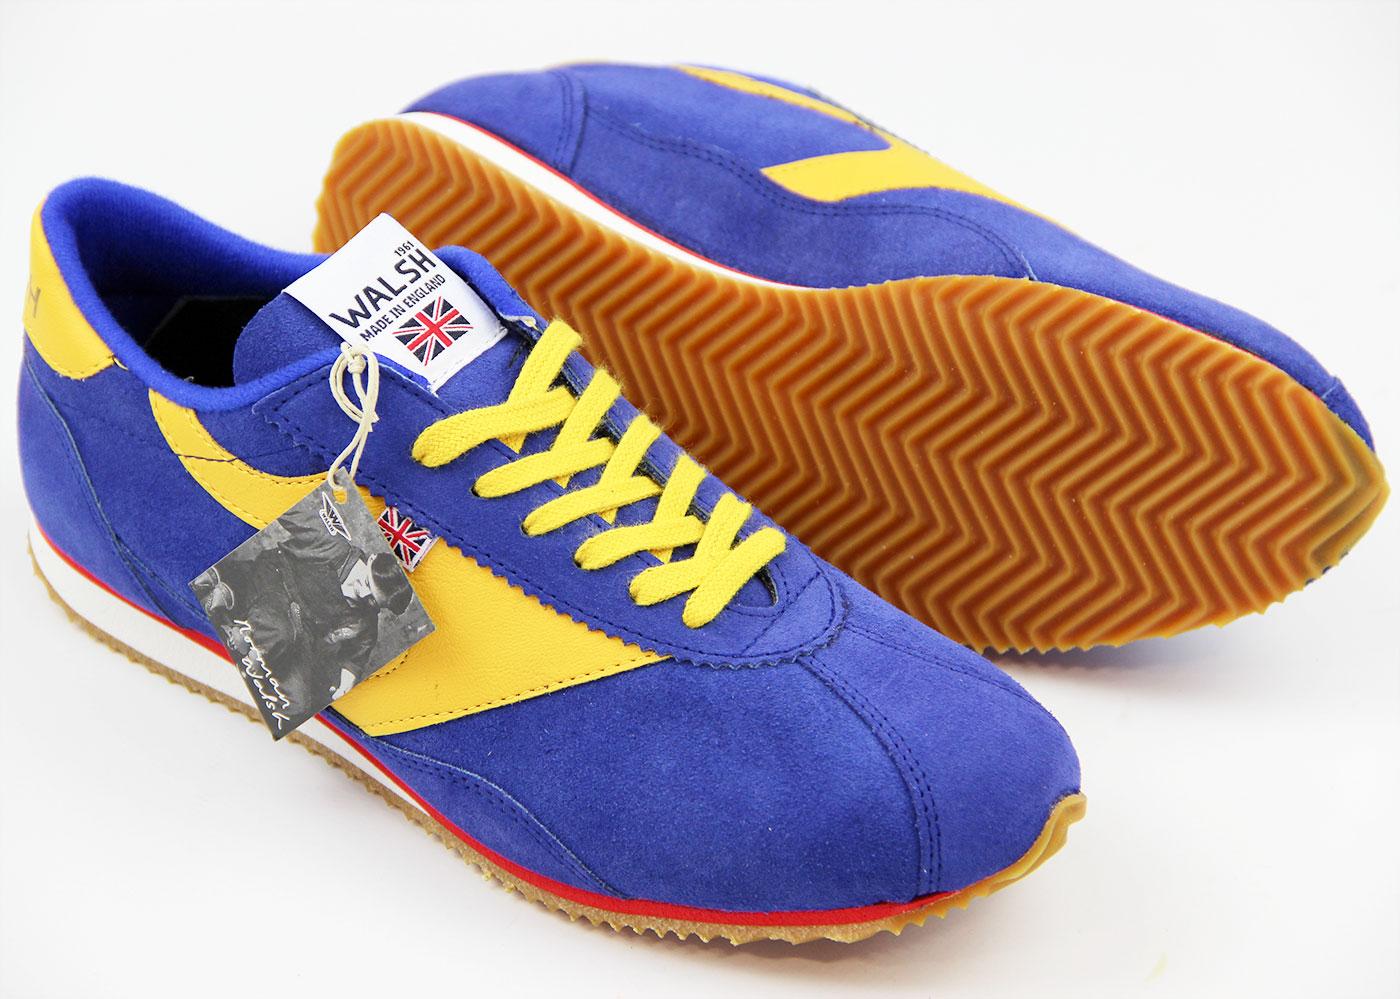 NORMAN WALSH Cobra Race Retro Indie Running Trainers Blue/Yellow